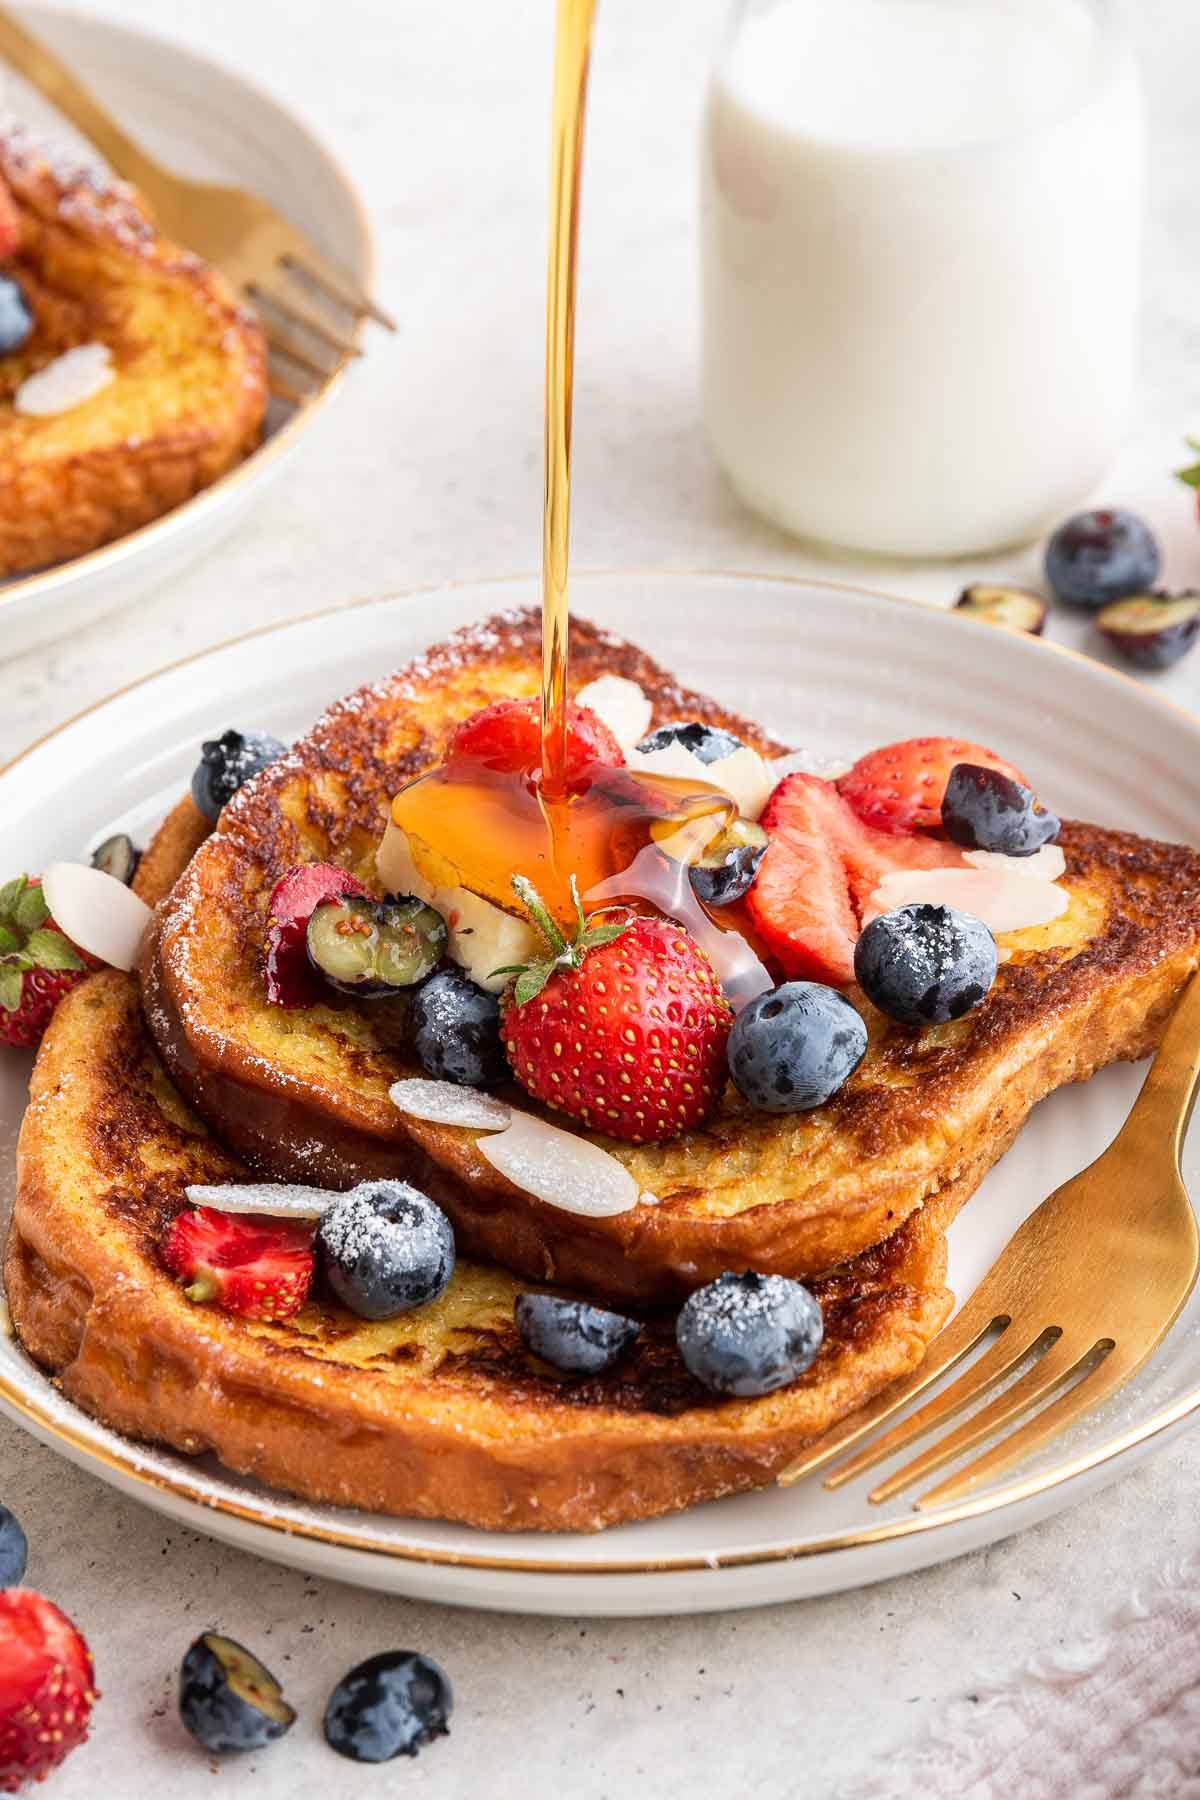 How to Make Crispy French Toast Stovetop